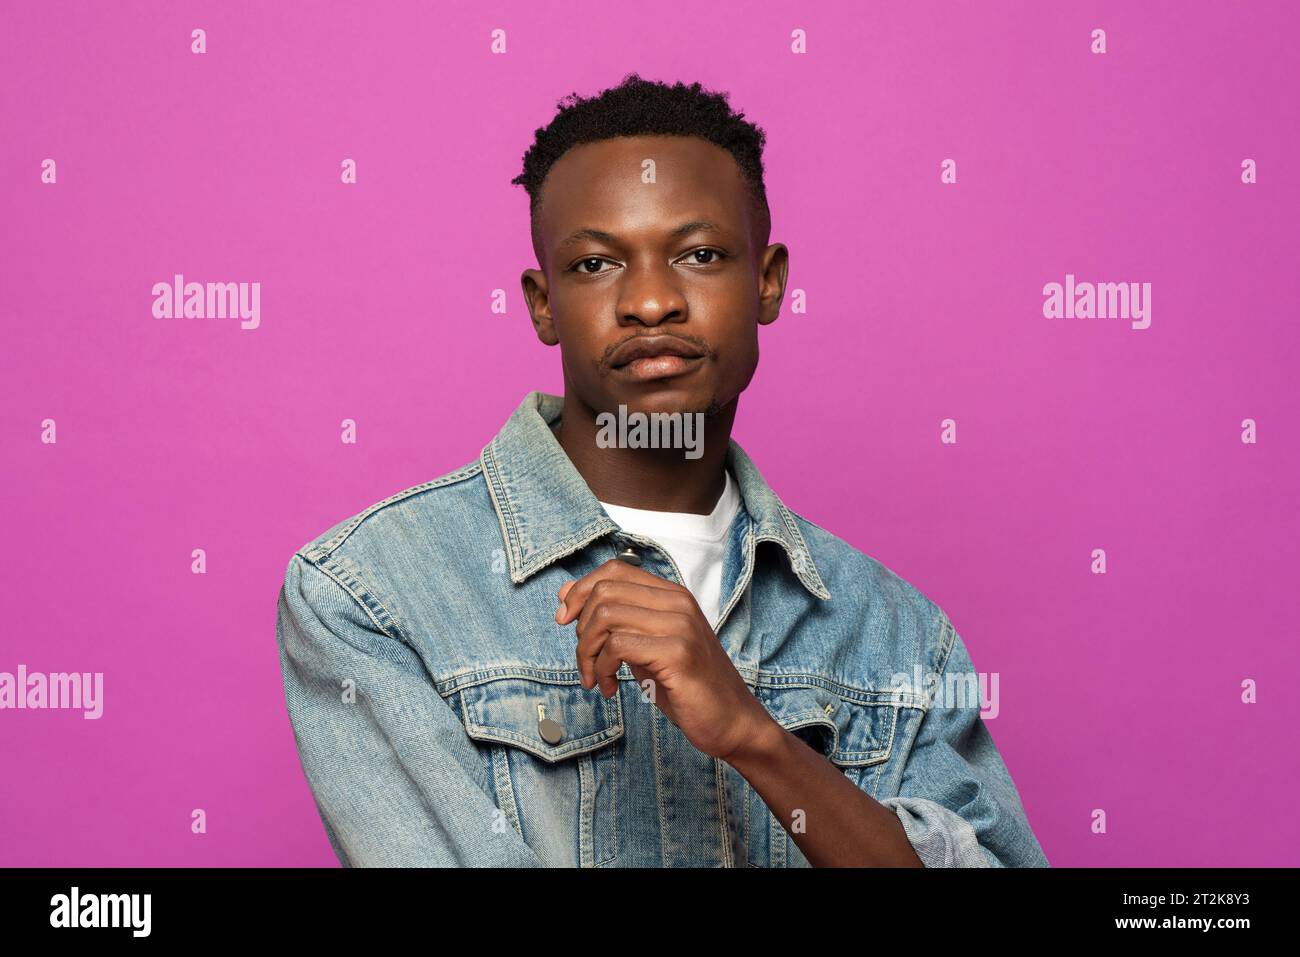 Portrait of young handsome African man model posing in purple color studio isolated background Stock Photo